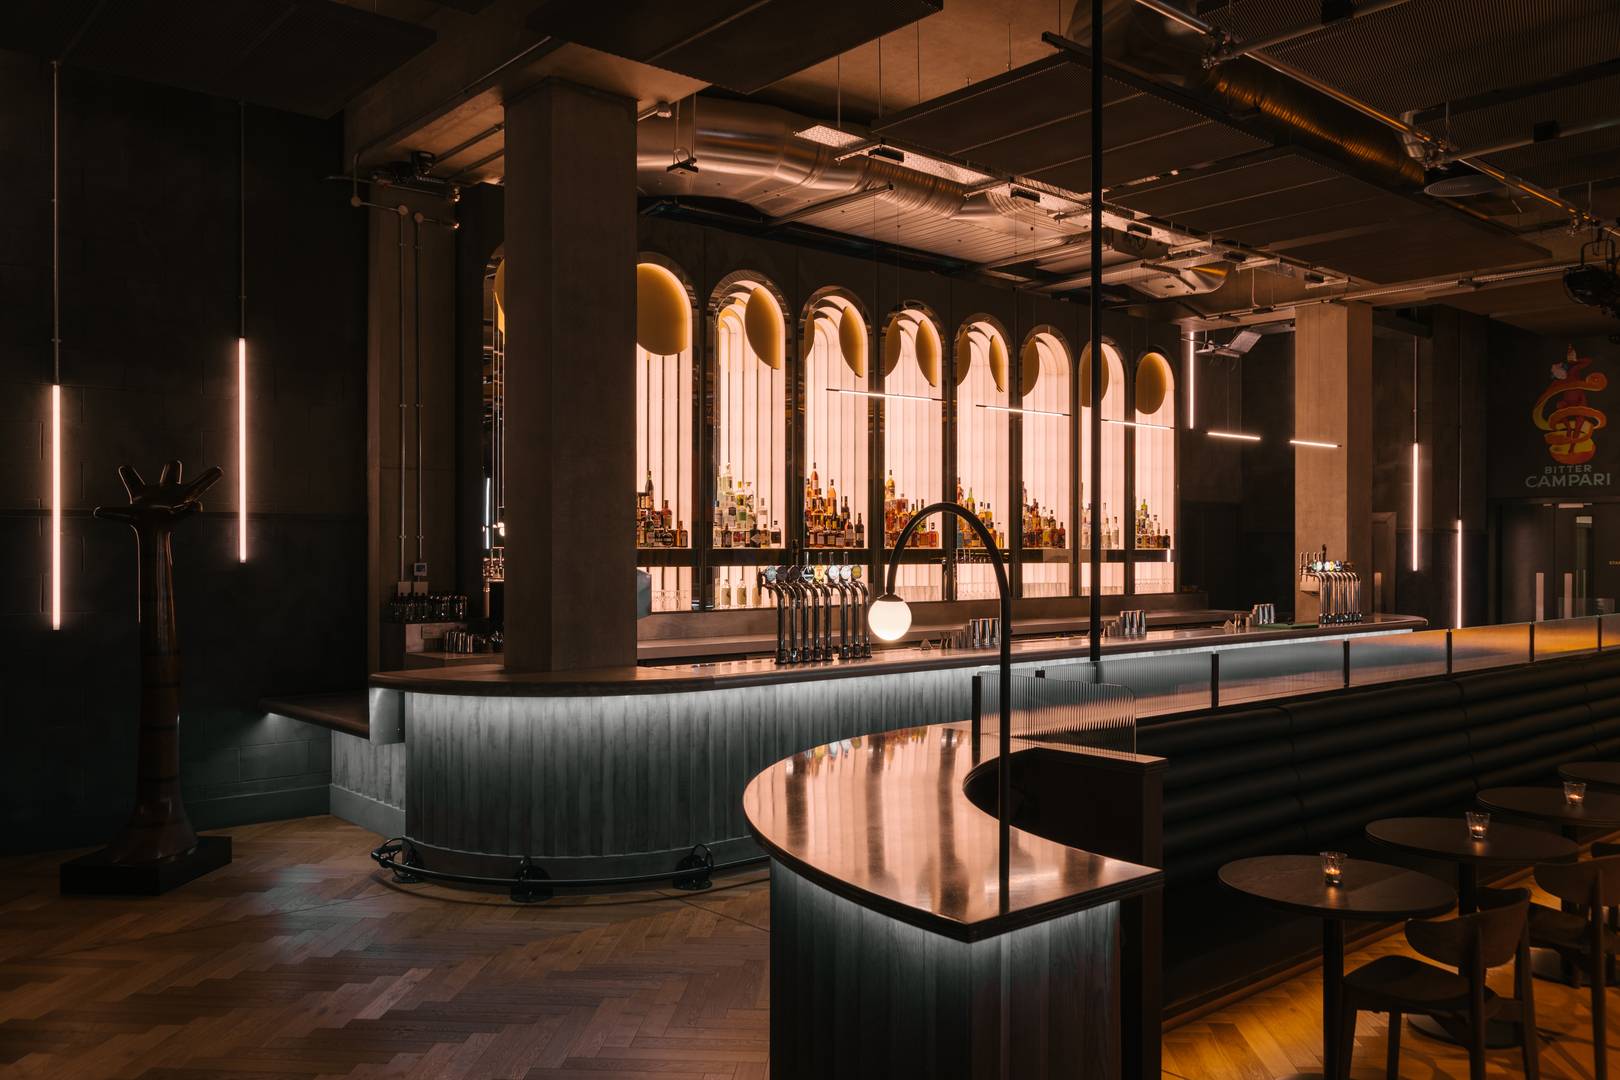 Romantic, sultry and a nod to art deco. Our bar in prominent position within the space, Patina Edinburgh